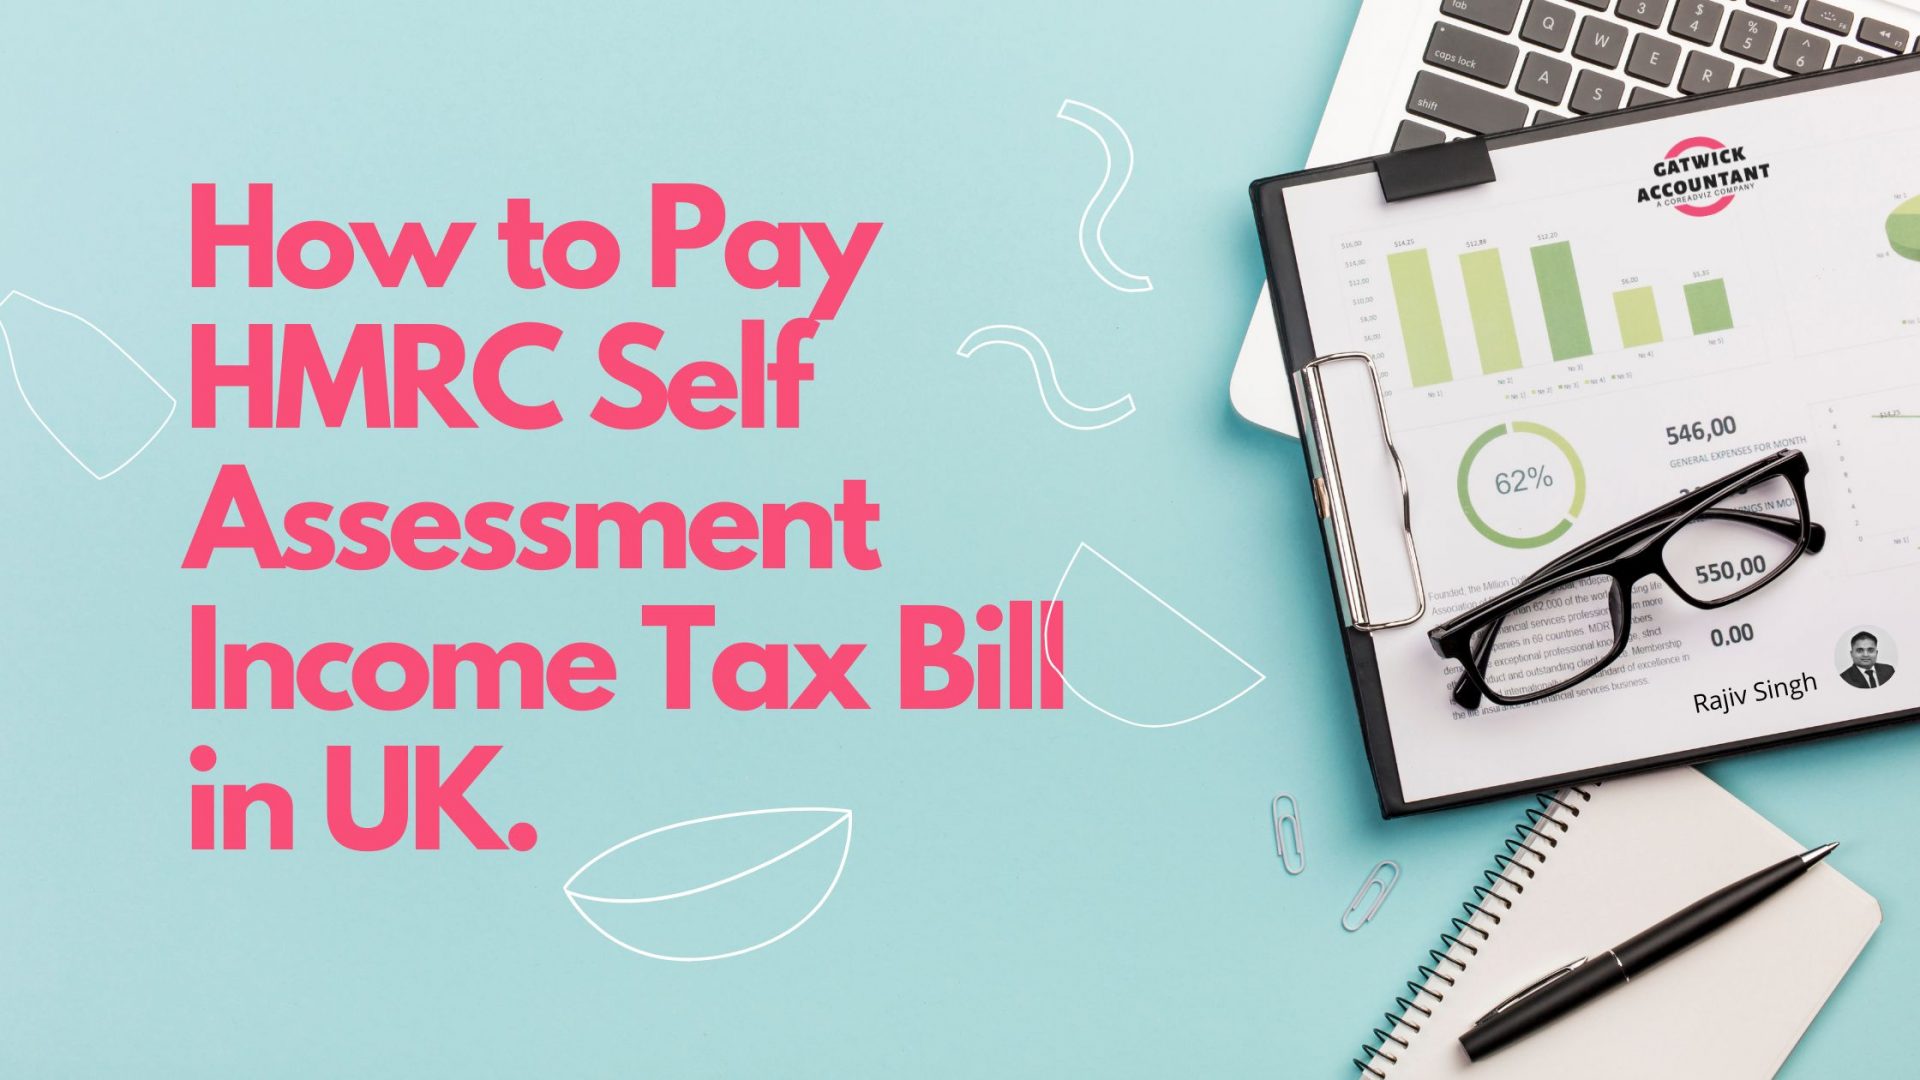 How to Pay HMRC Self Assessment Income Tax Bill in UK